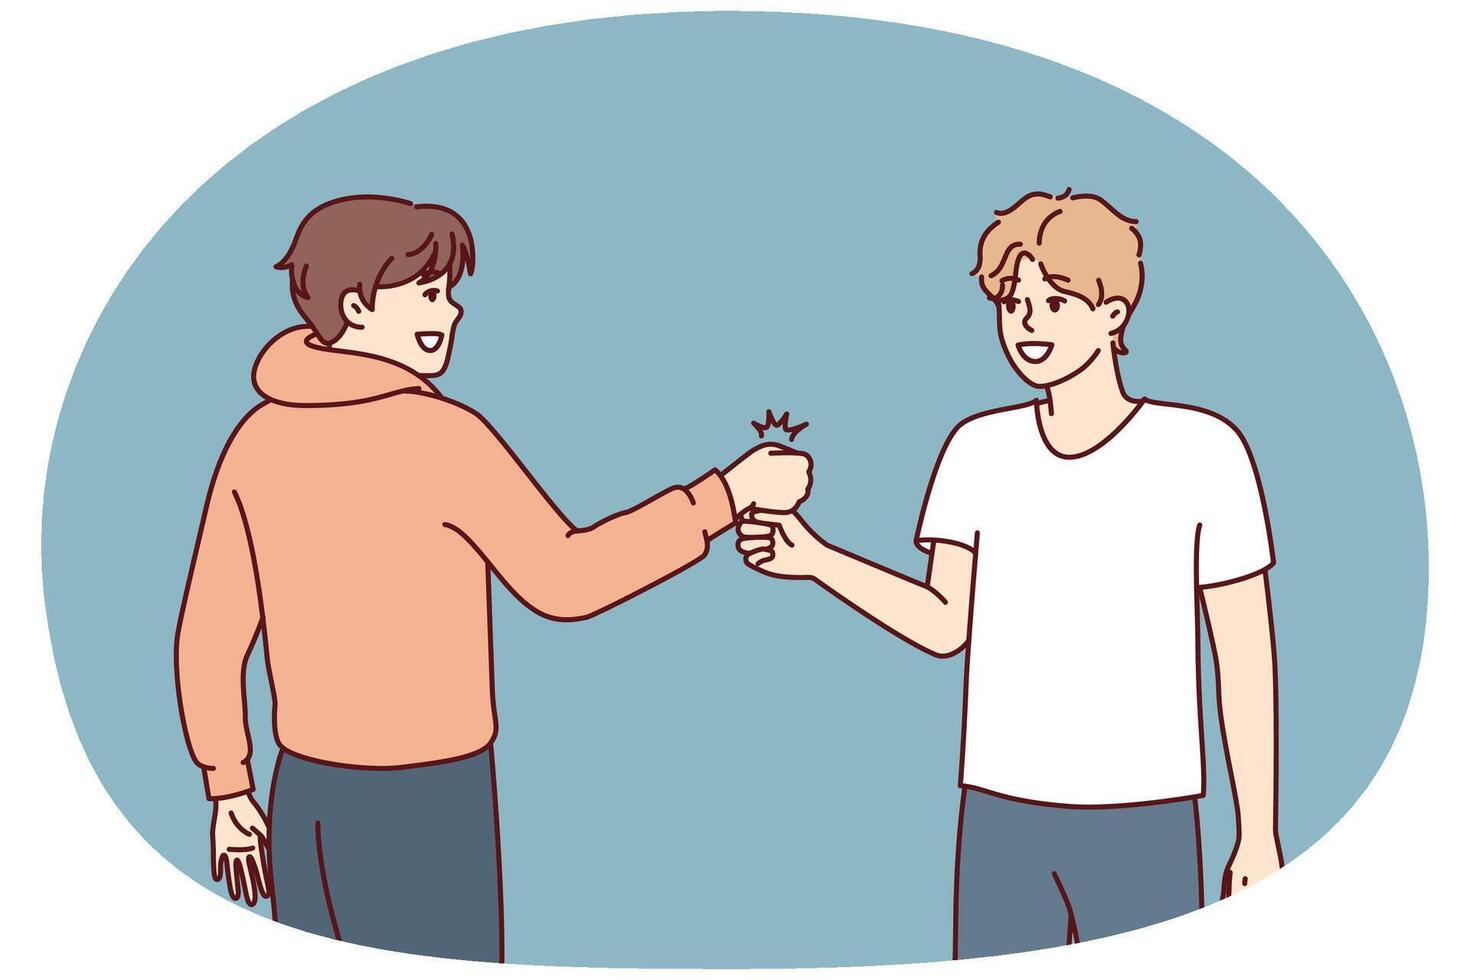 Guys bump their fists when meet, making greeting for members of student fraternity vector